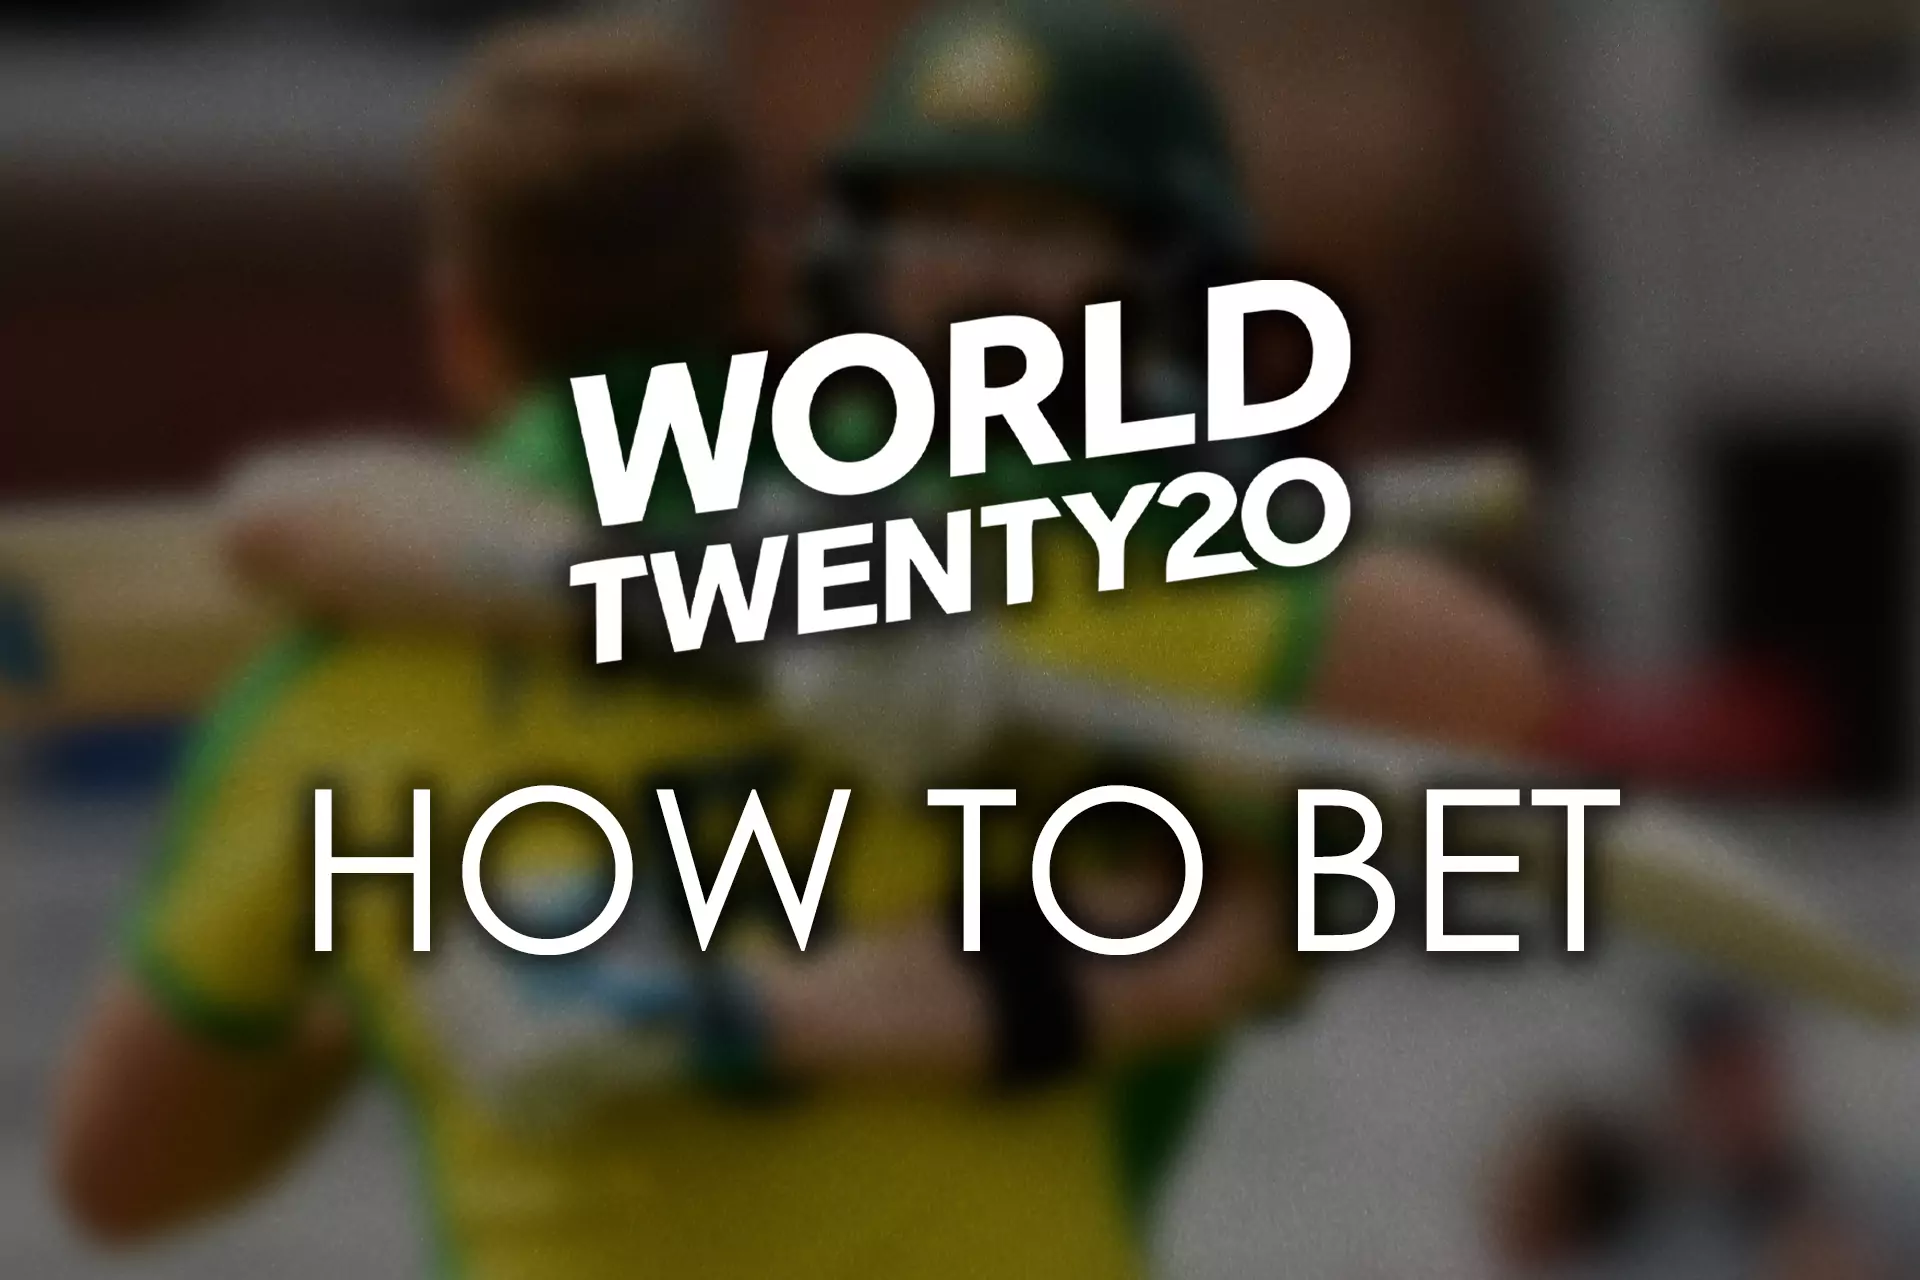 If you are going to start betting on the T20 World Cup events you need to sign up on a betting site.